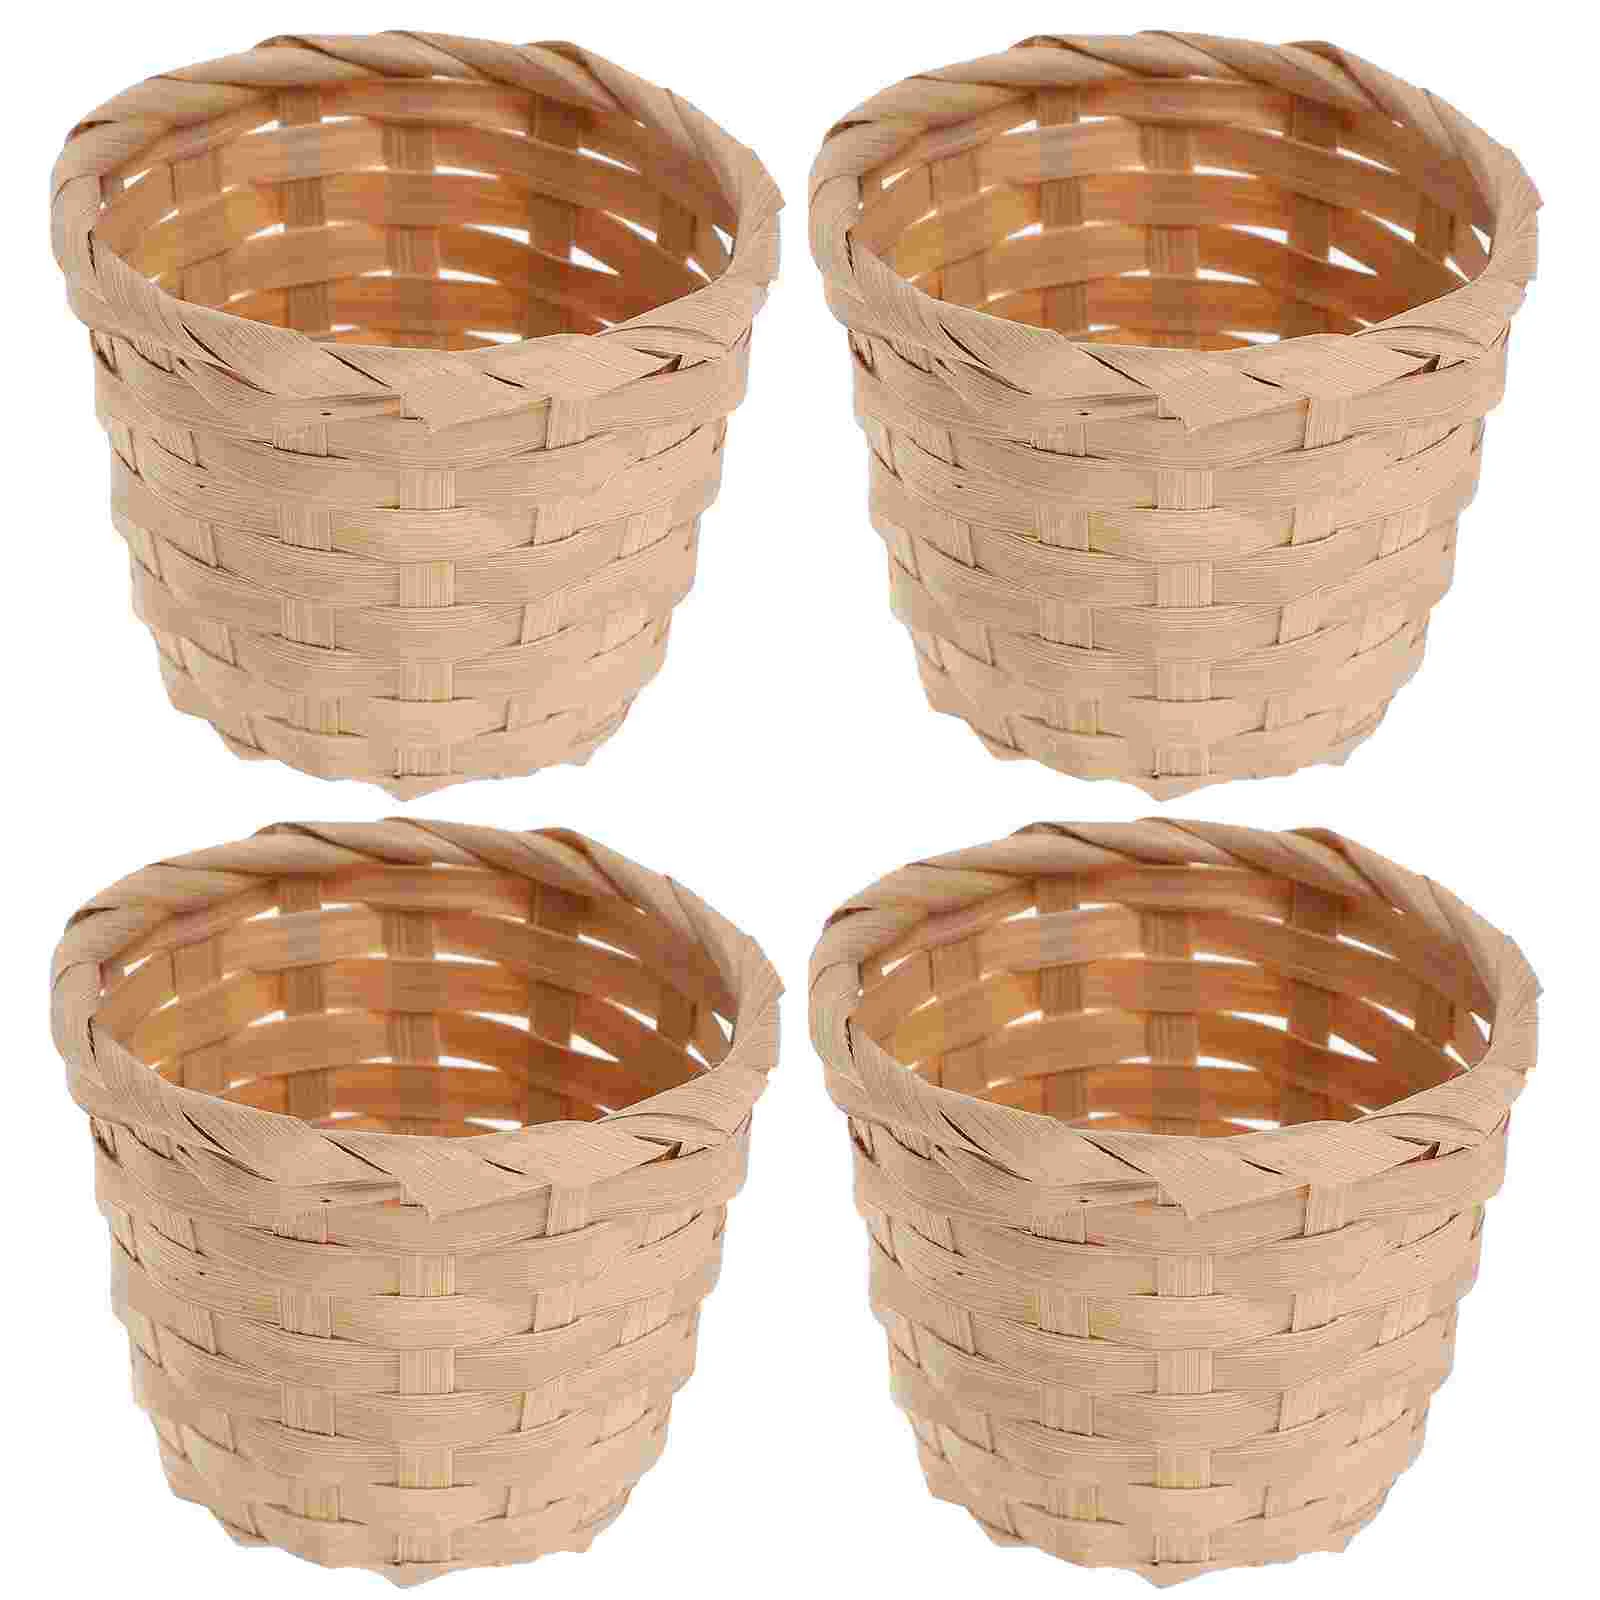 

Basket Baskets Mini Woven Storagesmalleaster Tiny Flower Rattan Crafts Wicker Pot Party Miniature Favor Can Planter Indoor Trash